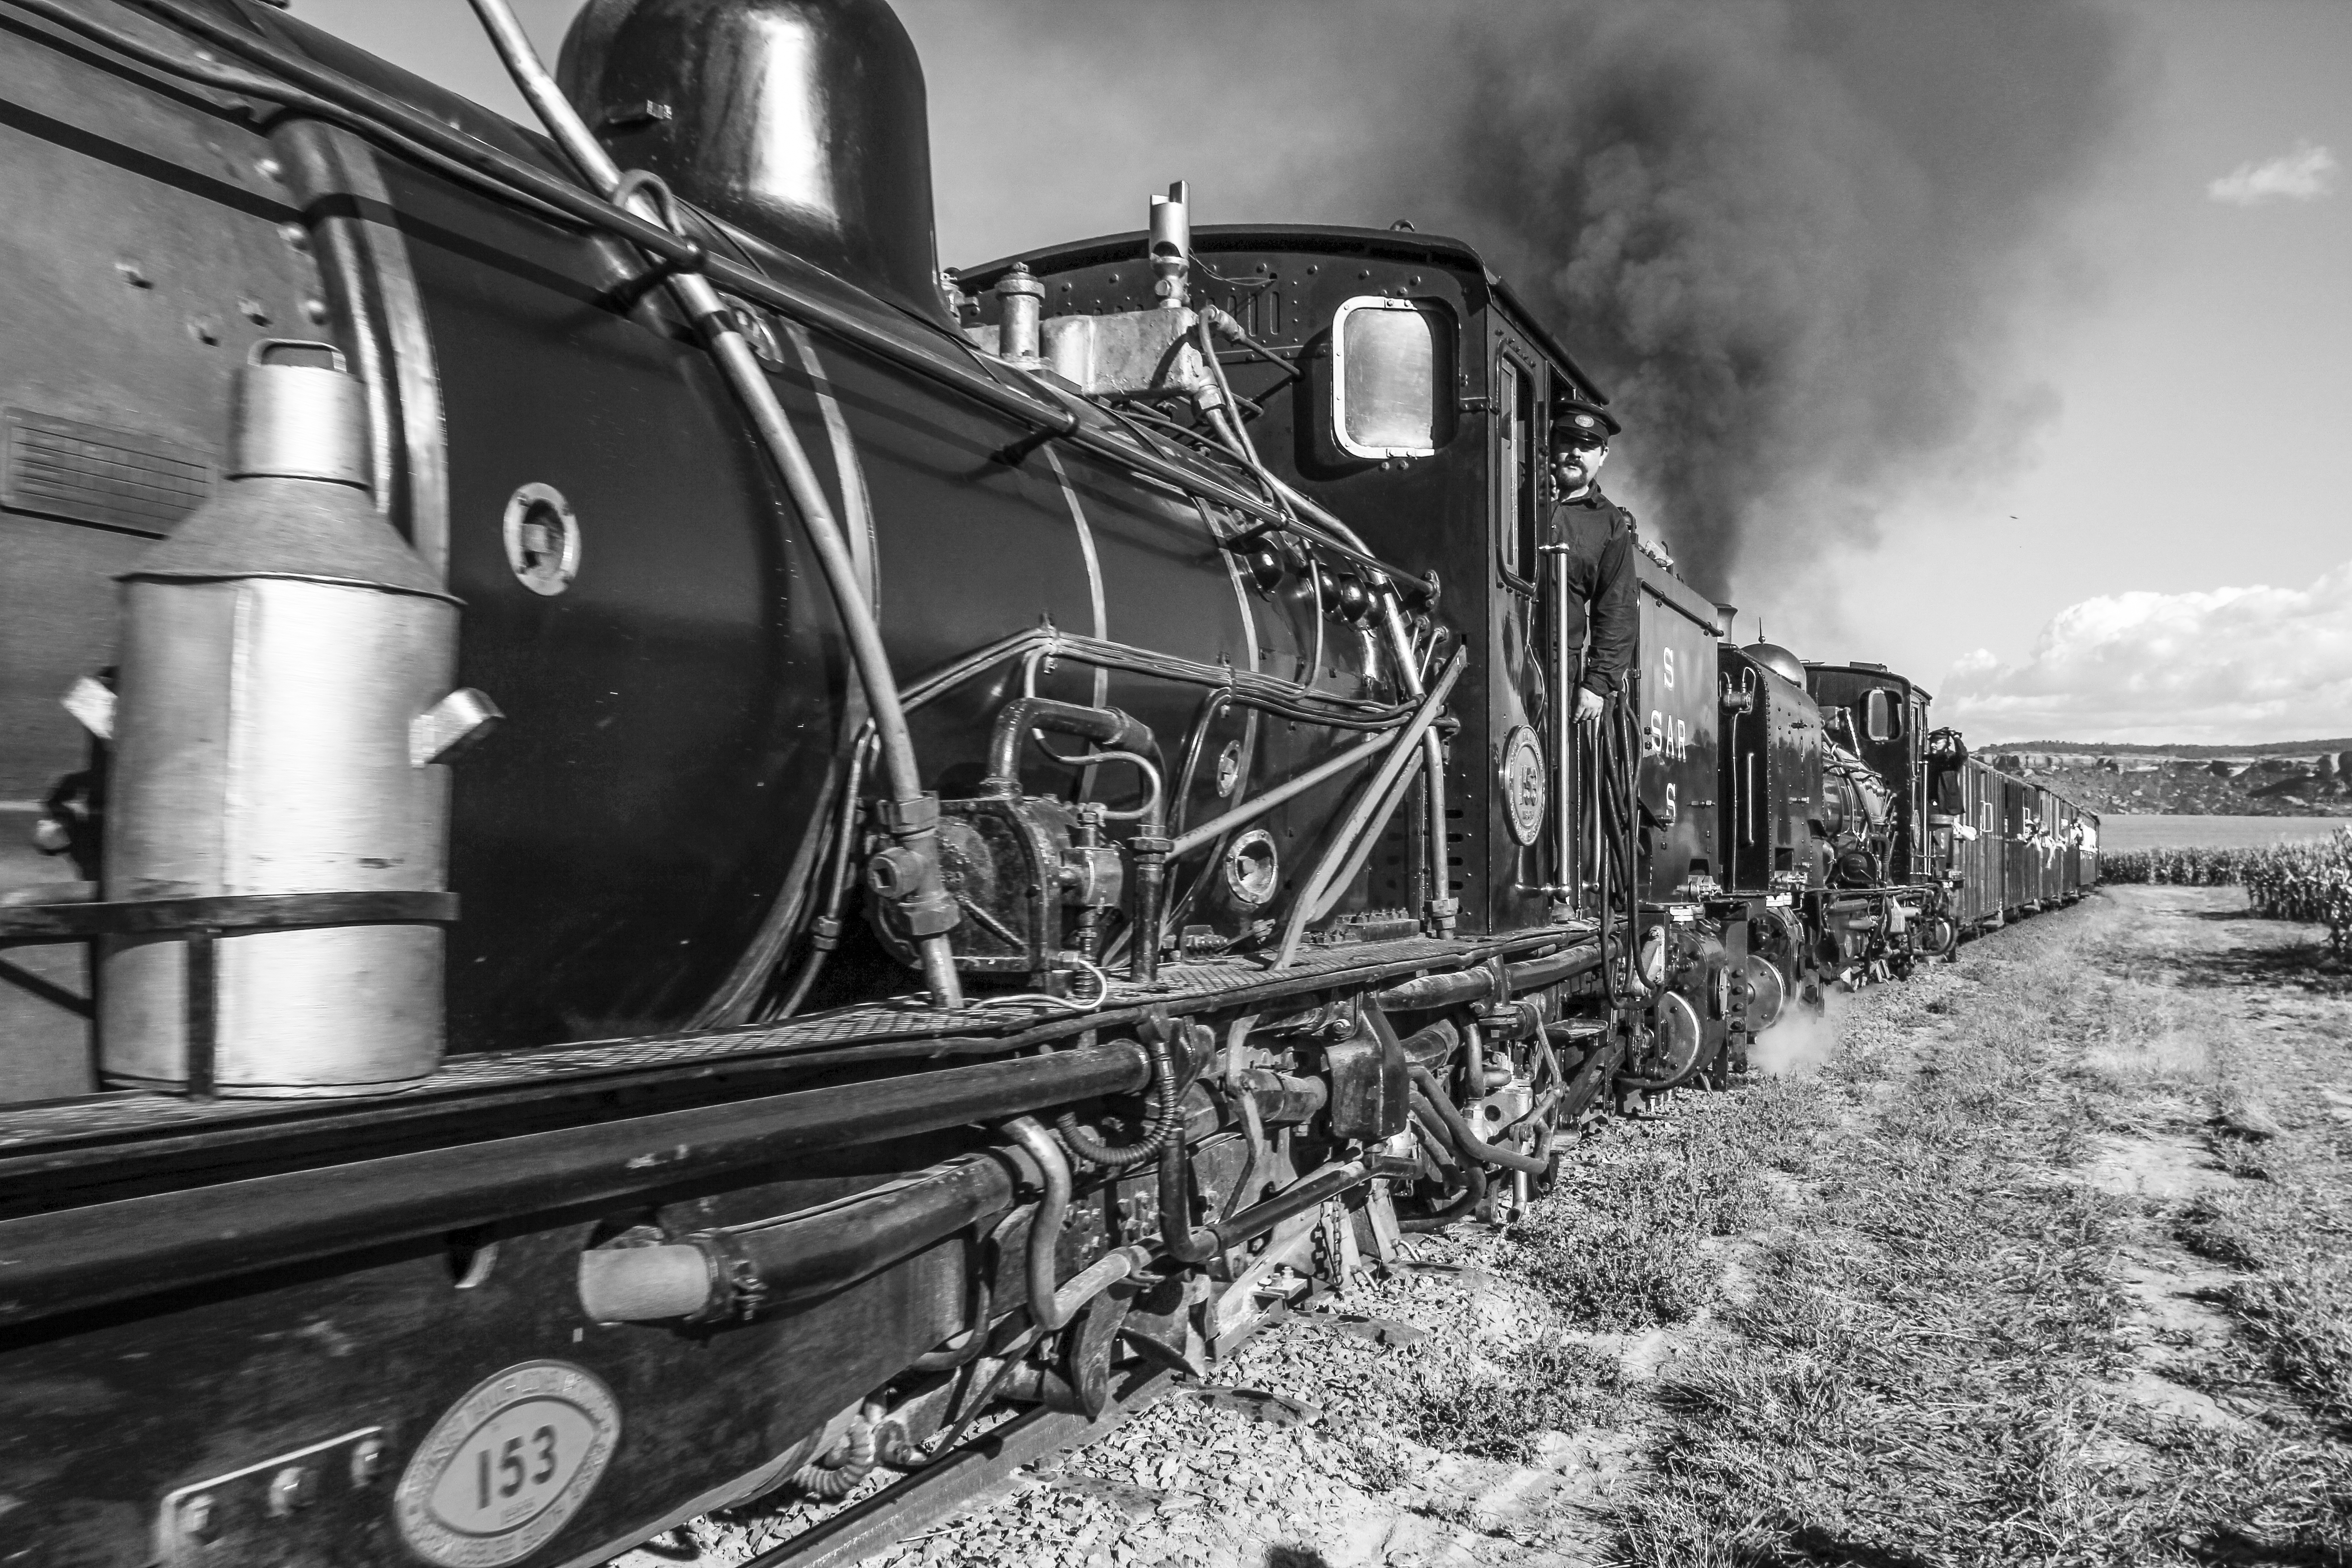 “On the tracks, the locomotive is your first love – you are more at home in the caboose than out of it.” Image: Chris Marais